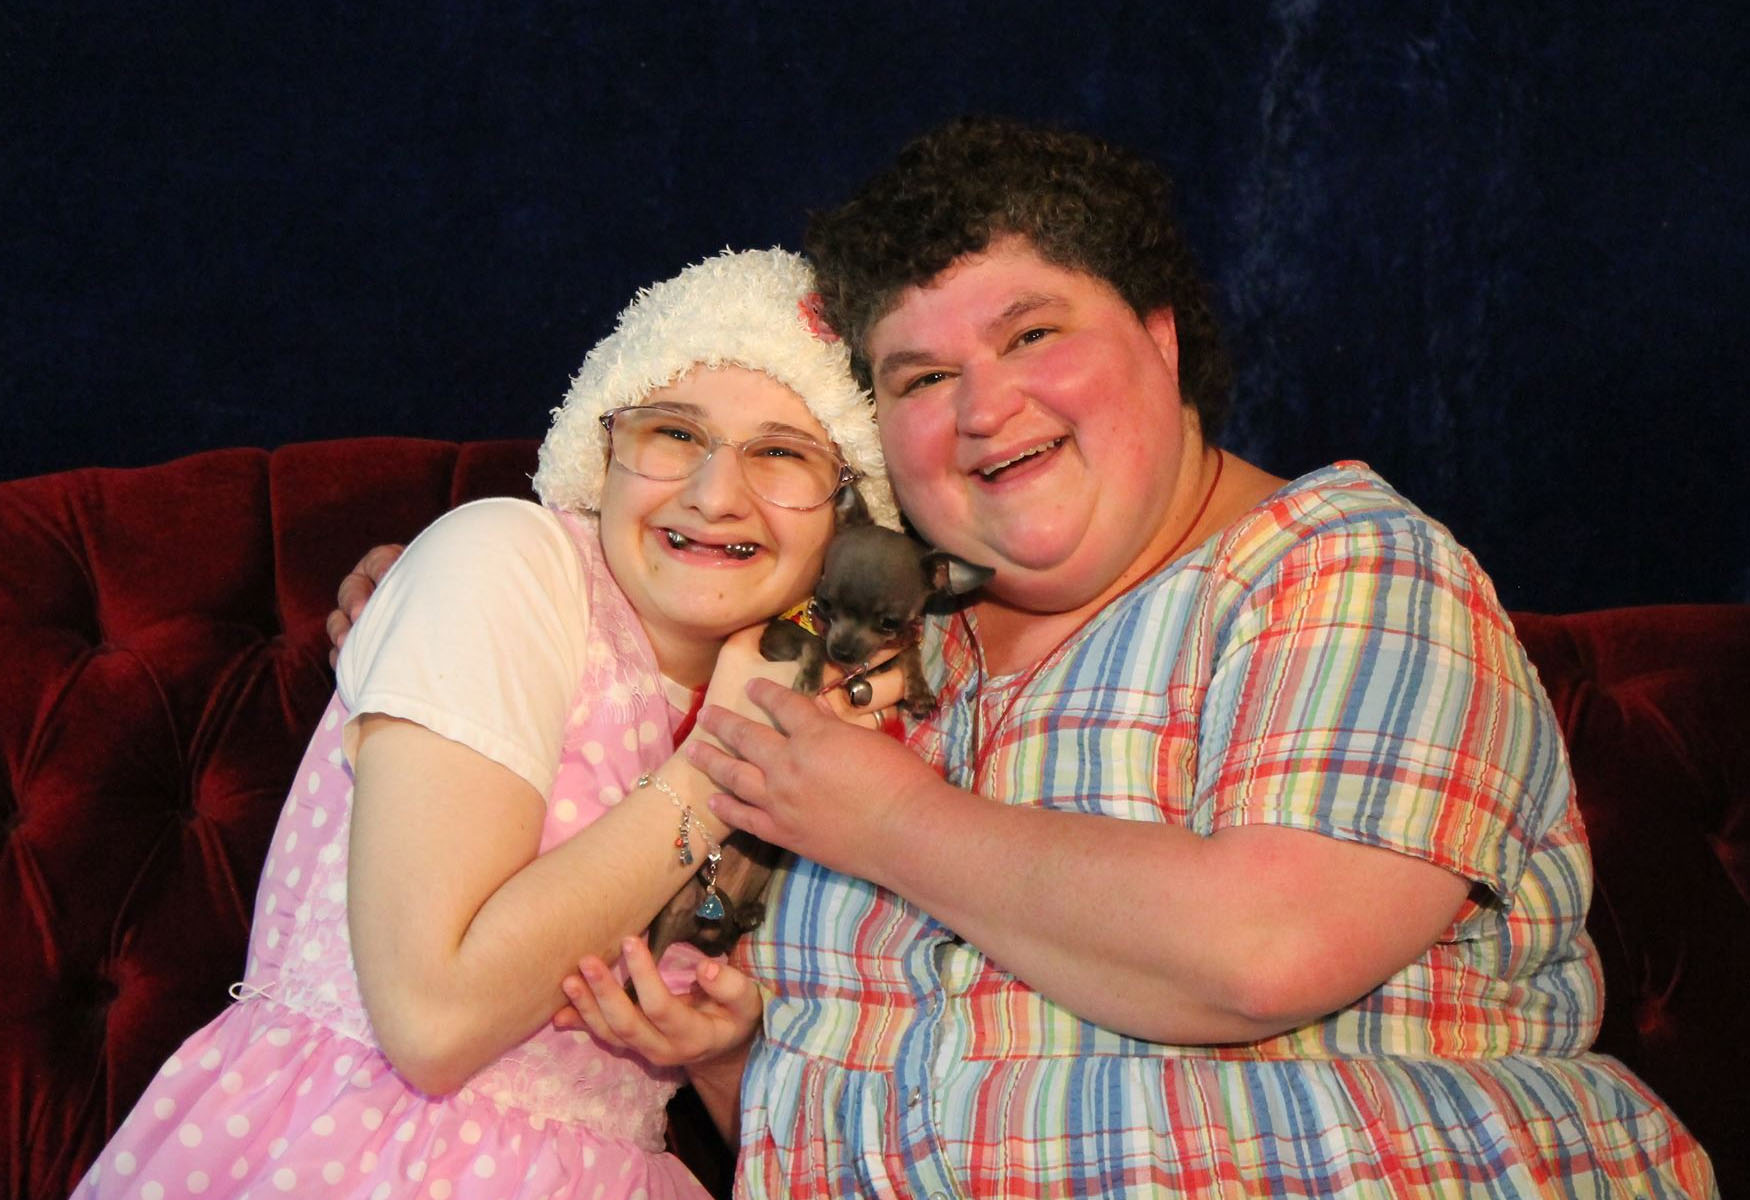 Gypsy Rose Blanchard Receives Support From Munchausen Syndrome Organization